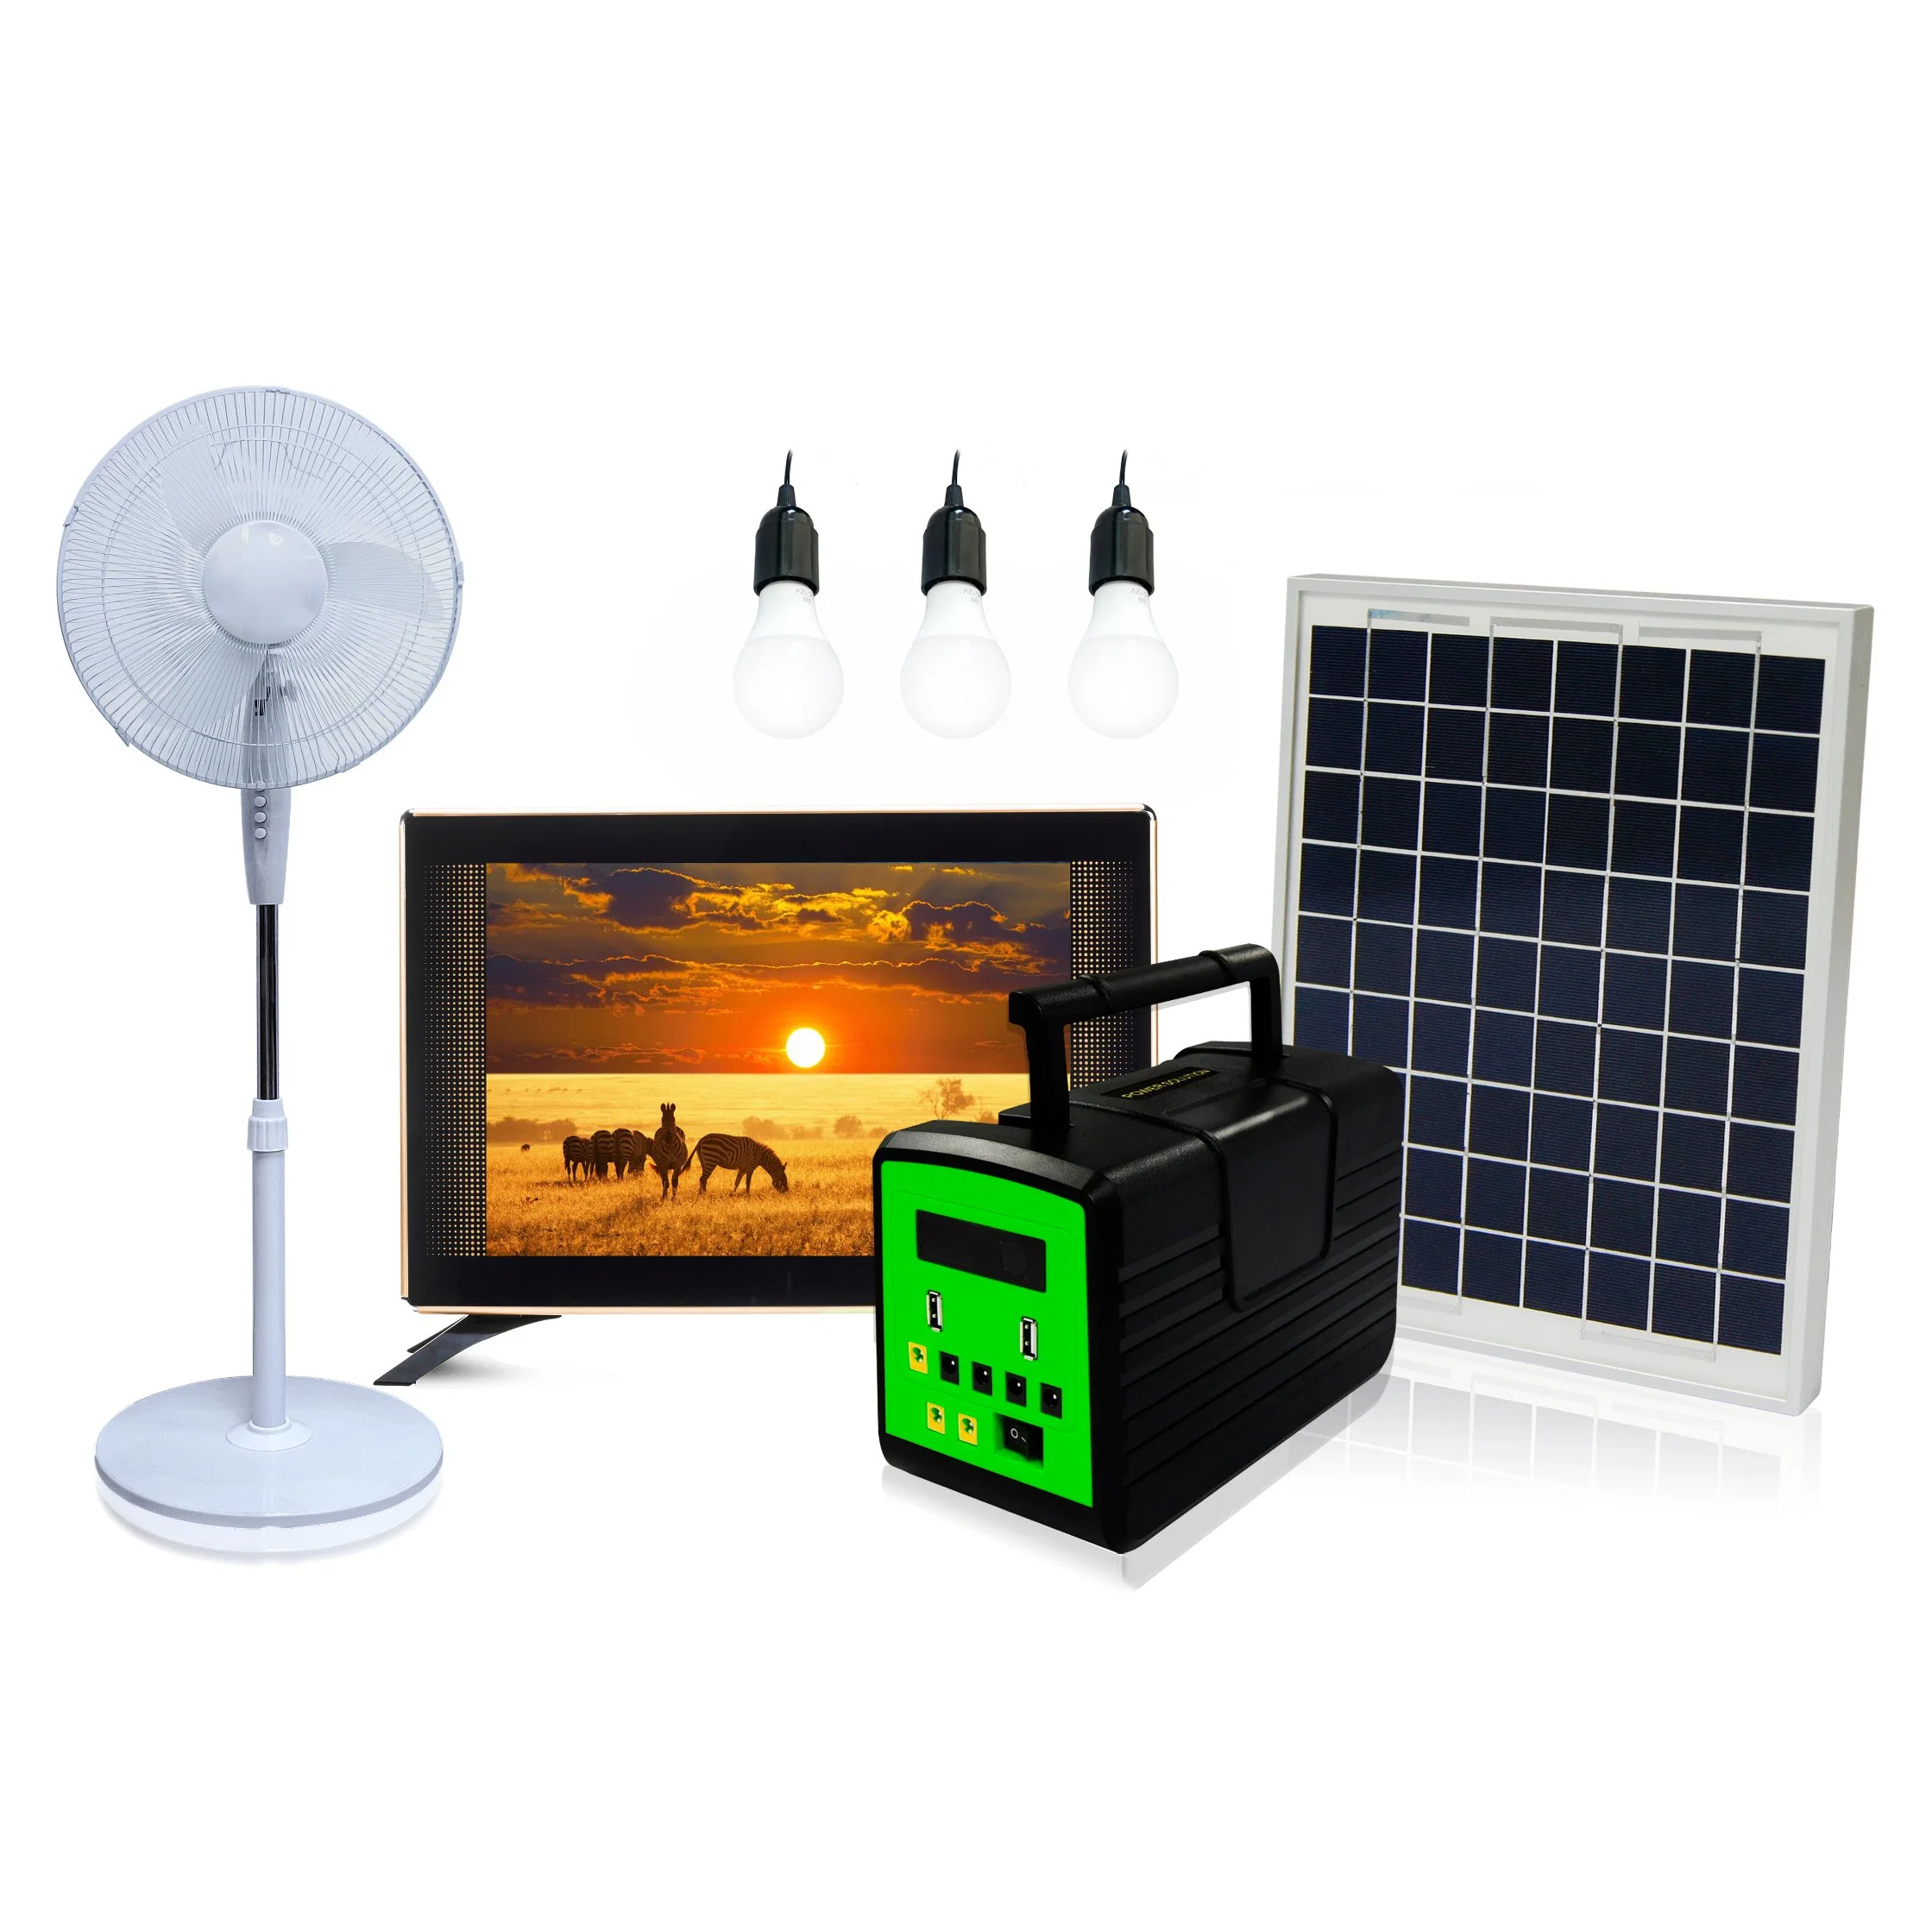 Mini Home Solar Power System for Home Electricity